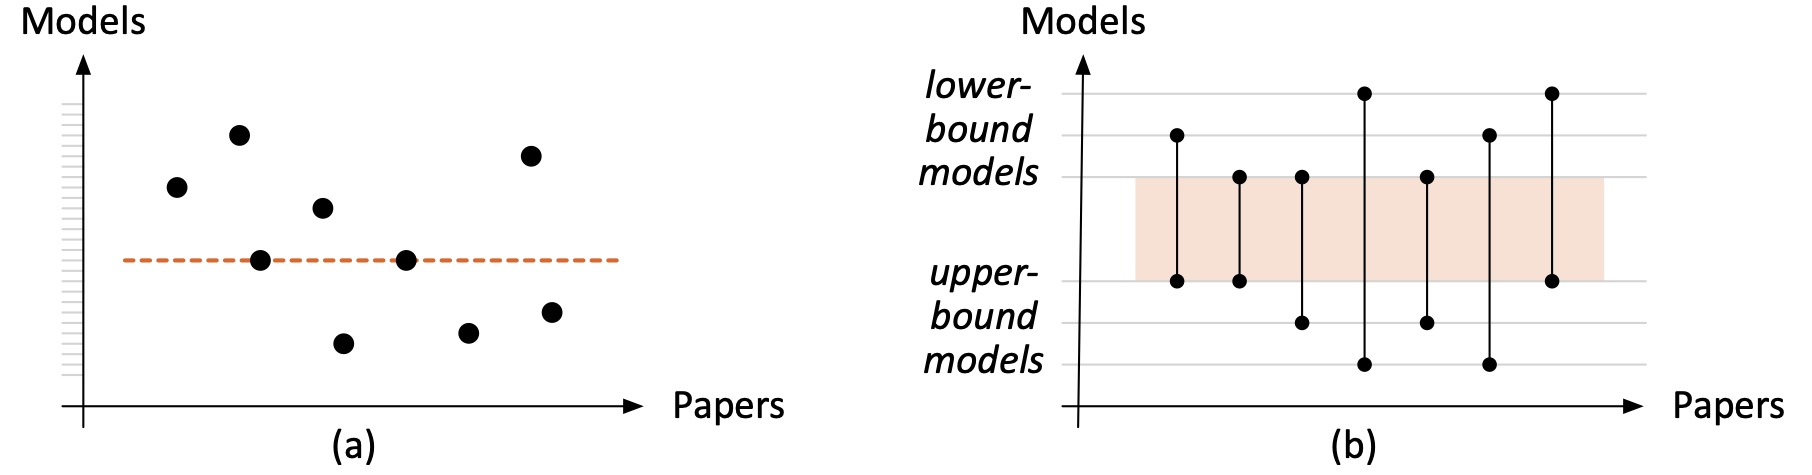 [A diagram that describes the models of computing studied in this project and their relations]